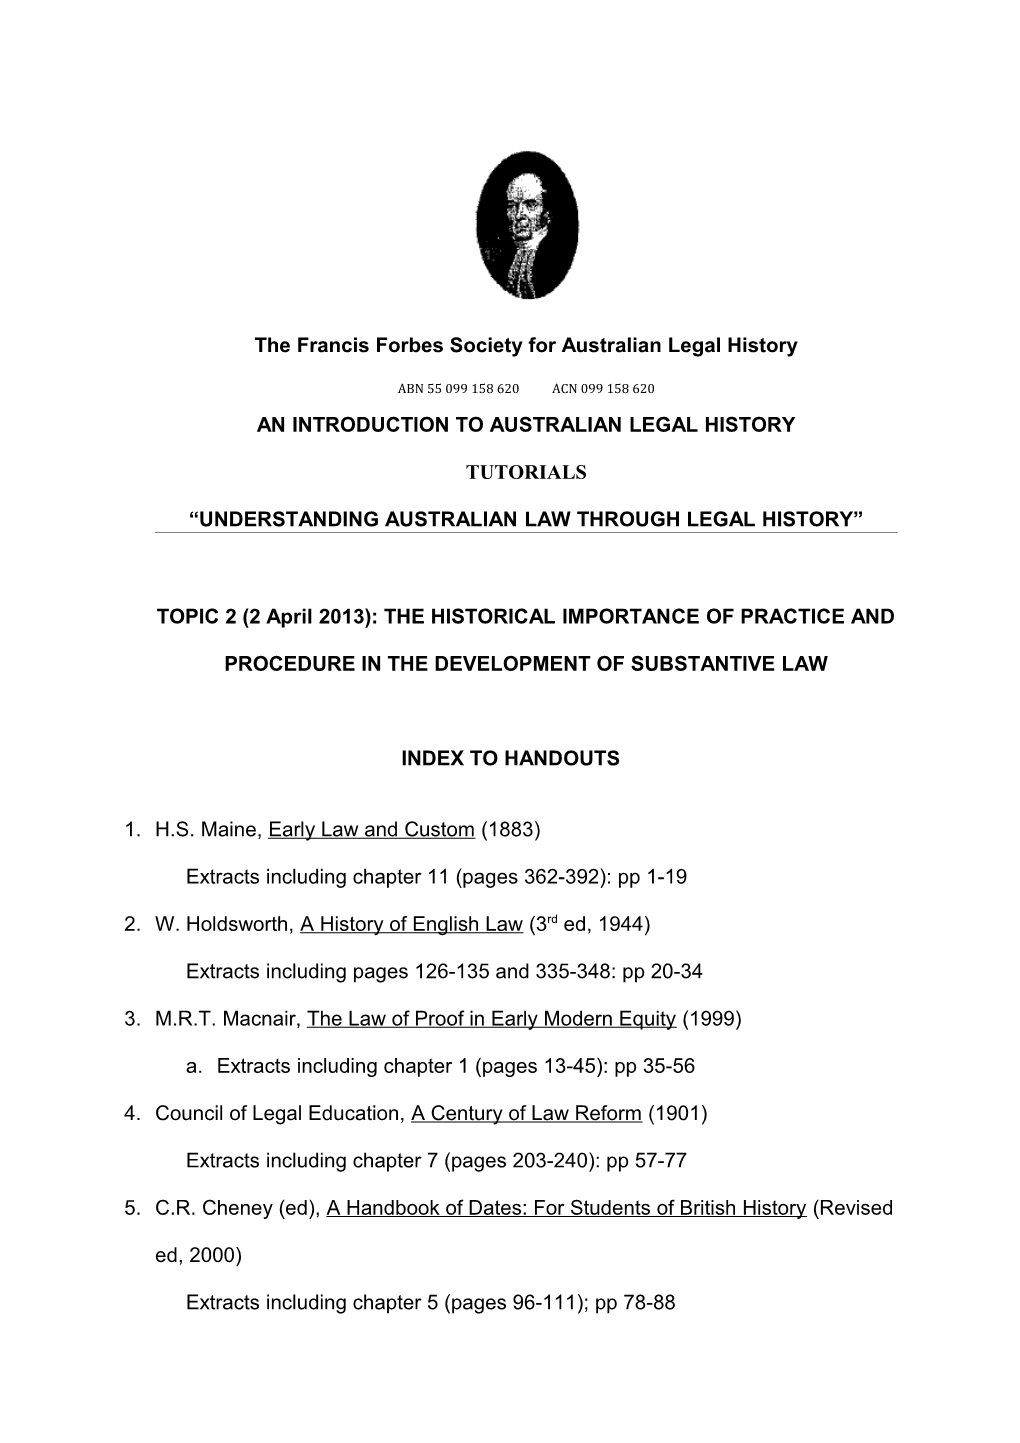 The Historical Importance of Practice and Procedure in the Development of Substantive Law